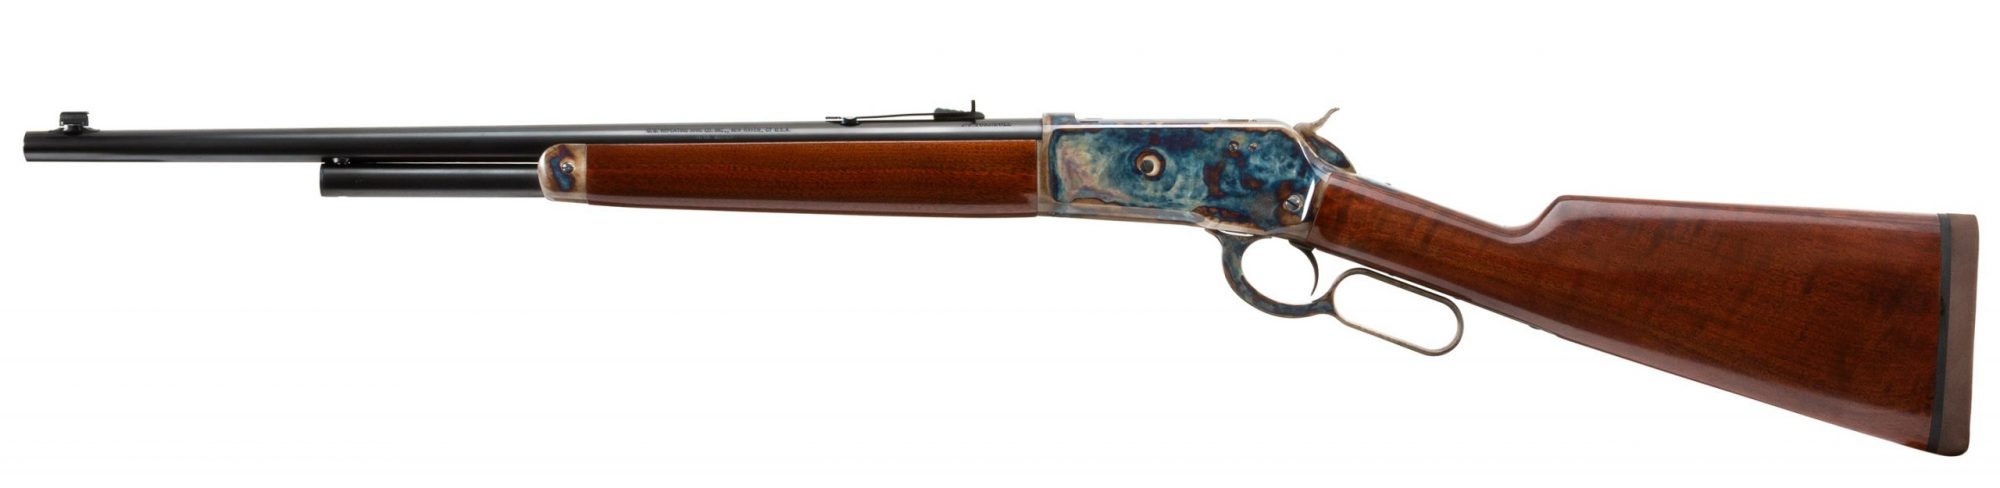 Photo of a Winchester Model 1886 reproduction - The Turnbull Restoration Model 1886 features classic era metal finishes including bone charcoal color case hardening, charcoal bluing and rust bluing